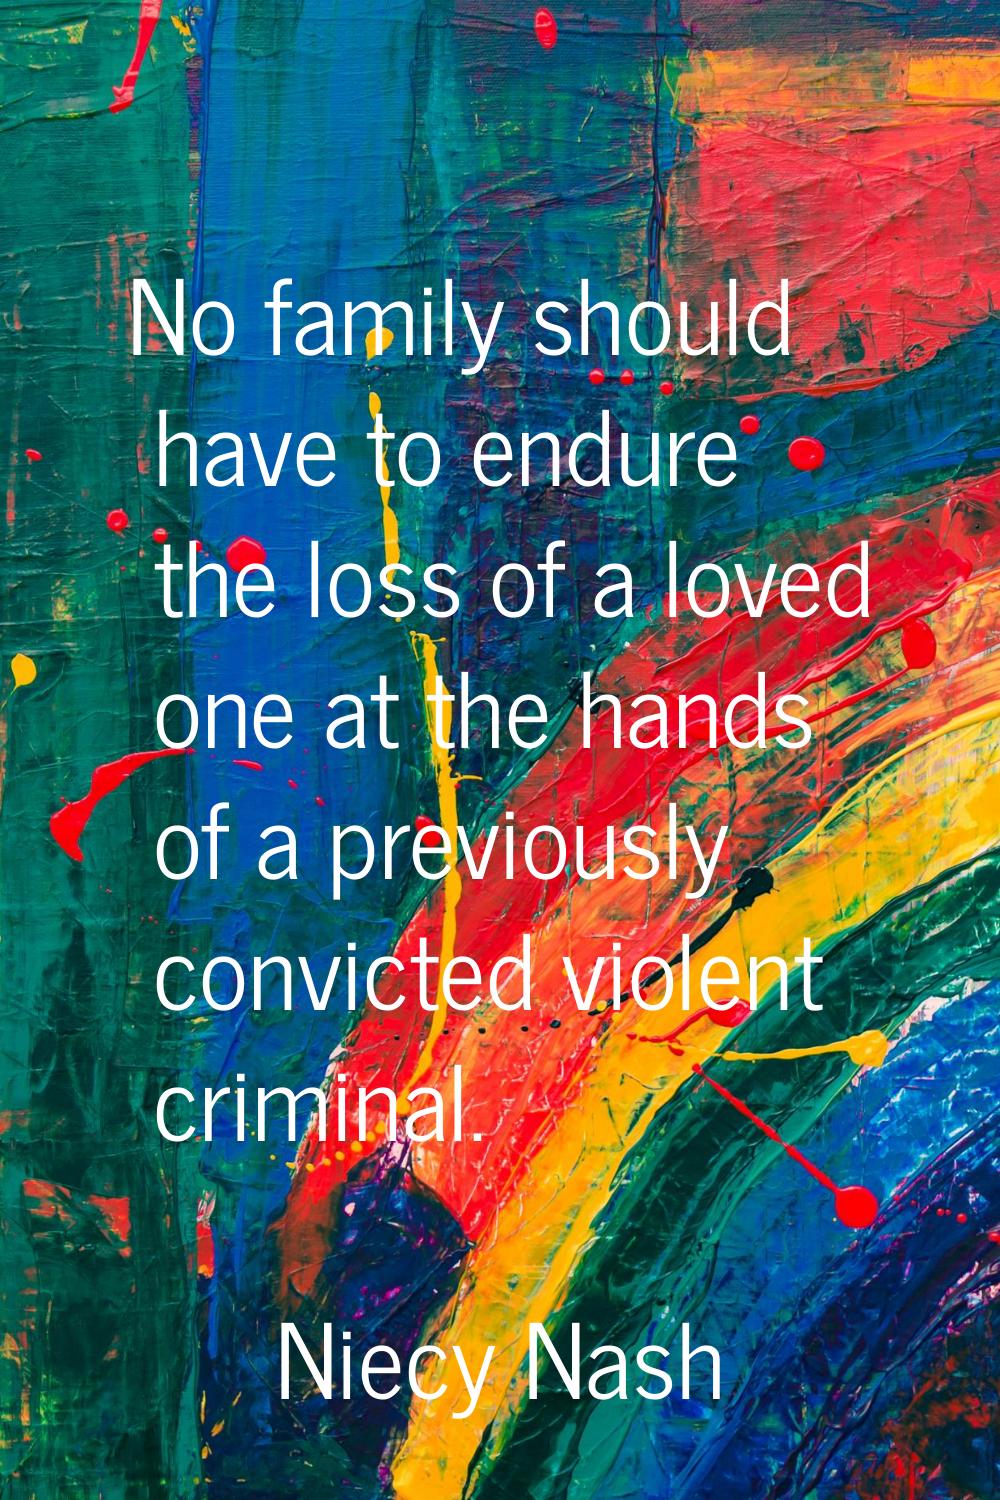 No family should have to endure the loss of a loved one at the hands of a previously convicted viol